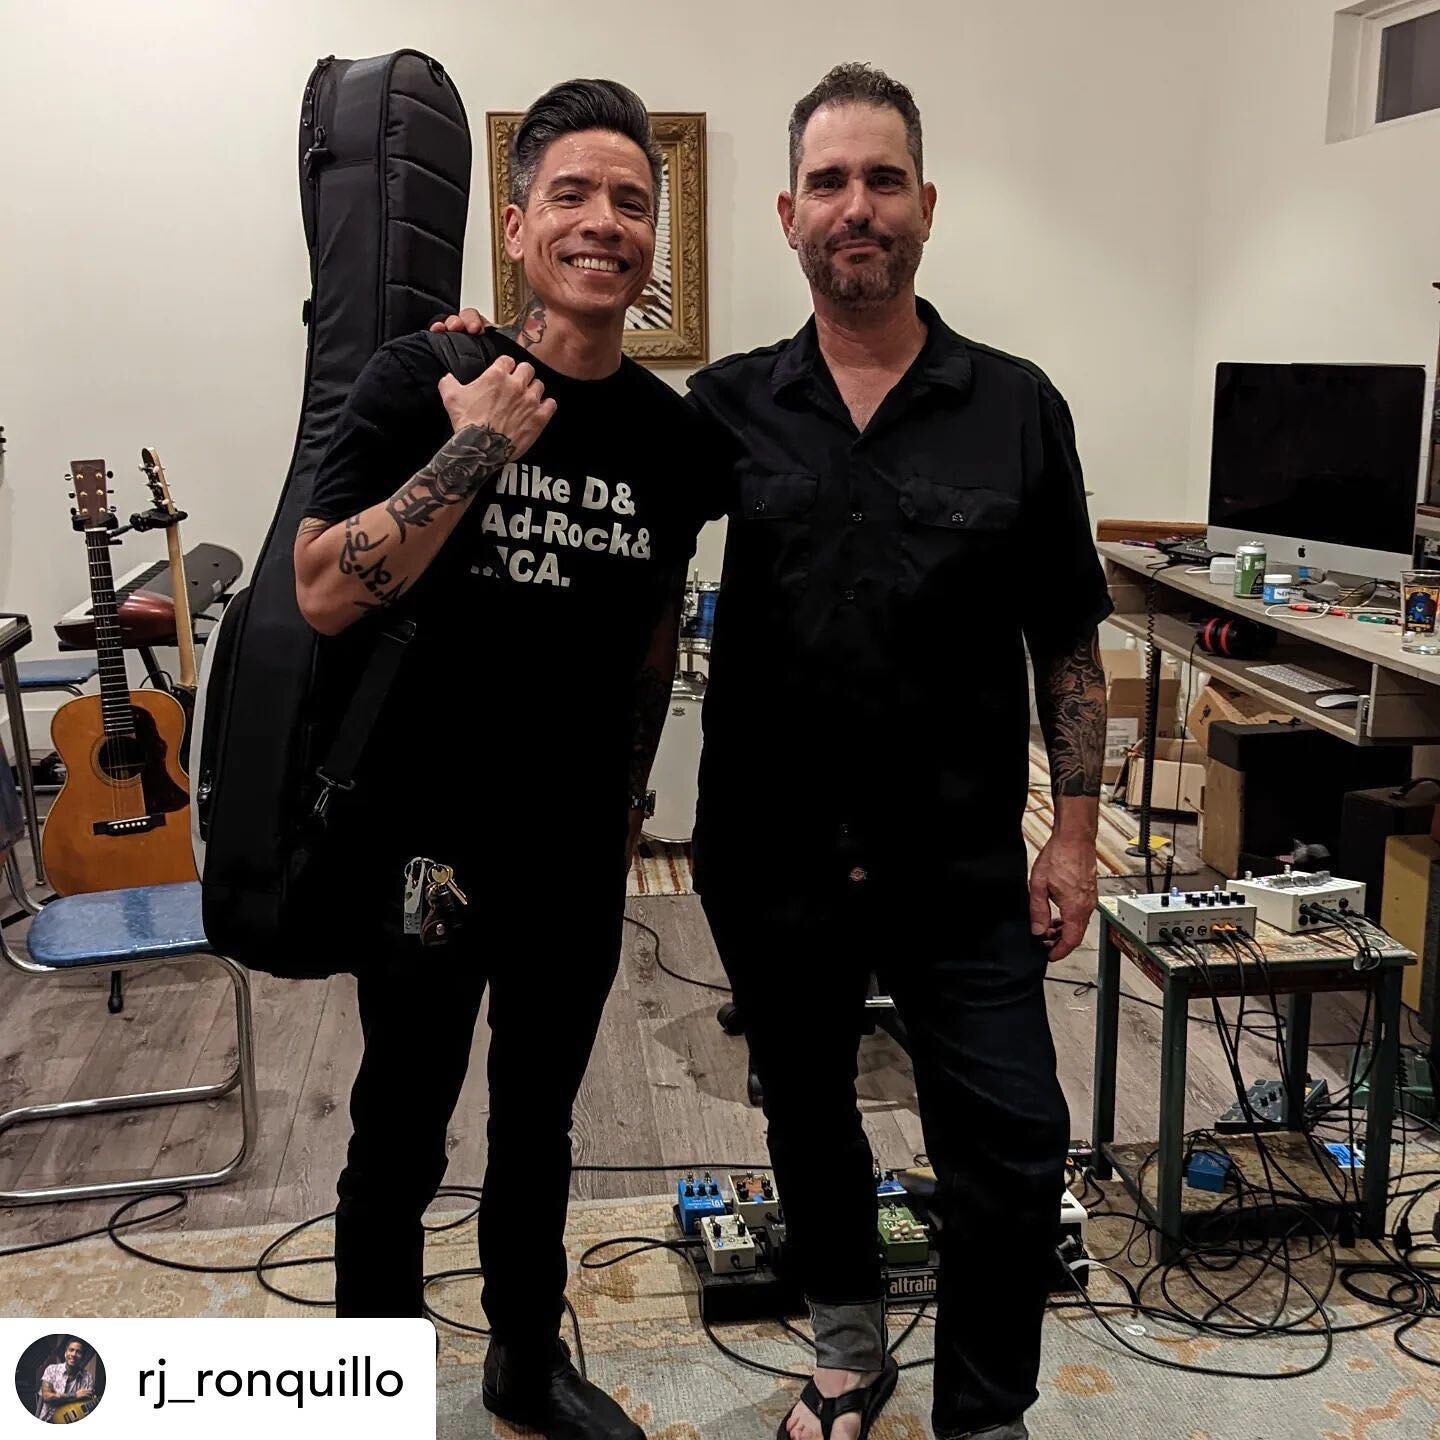 We took a field trip to Nashville with the man himself @charliehunter67 this was one of the highlights, courtesy of @rj_ronquillo  Posted @withrepost &bull; @rj_ronquillo Fun hangs and jams tonight with @charliehunter67 and the @hybridguitars crew - 